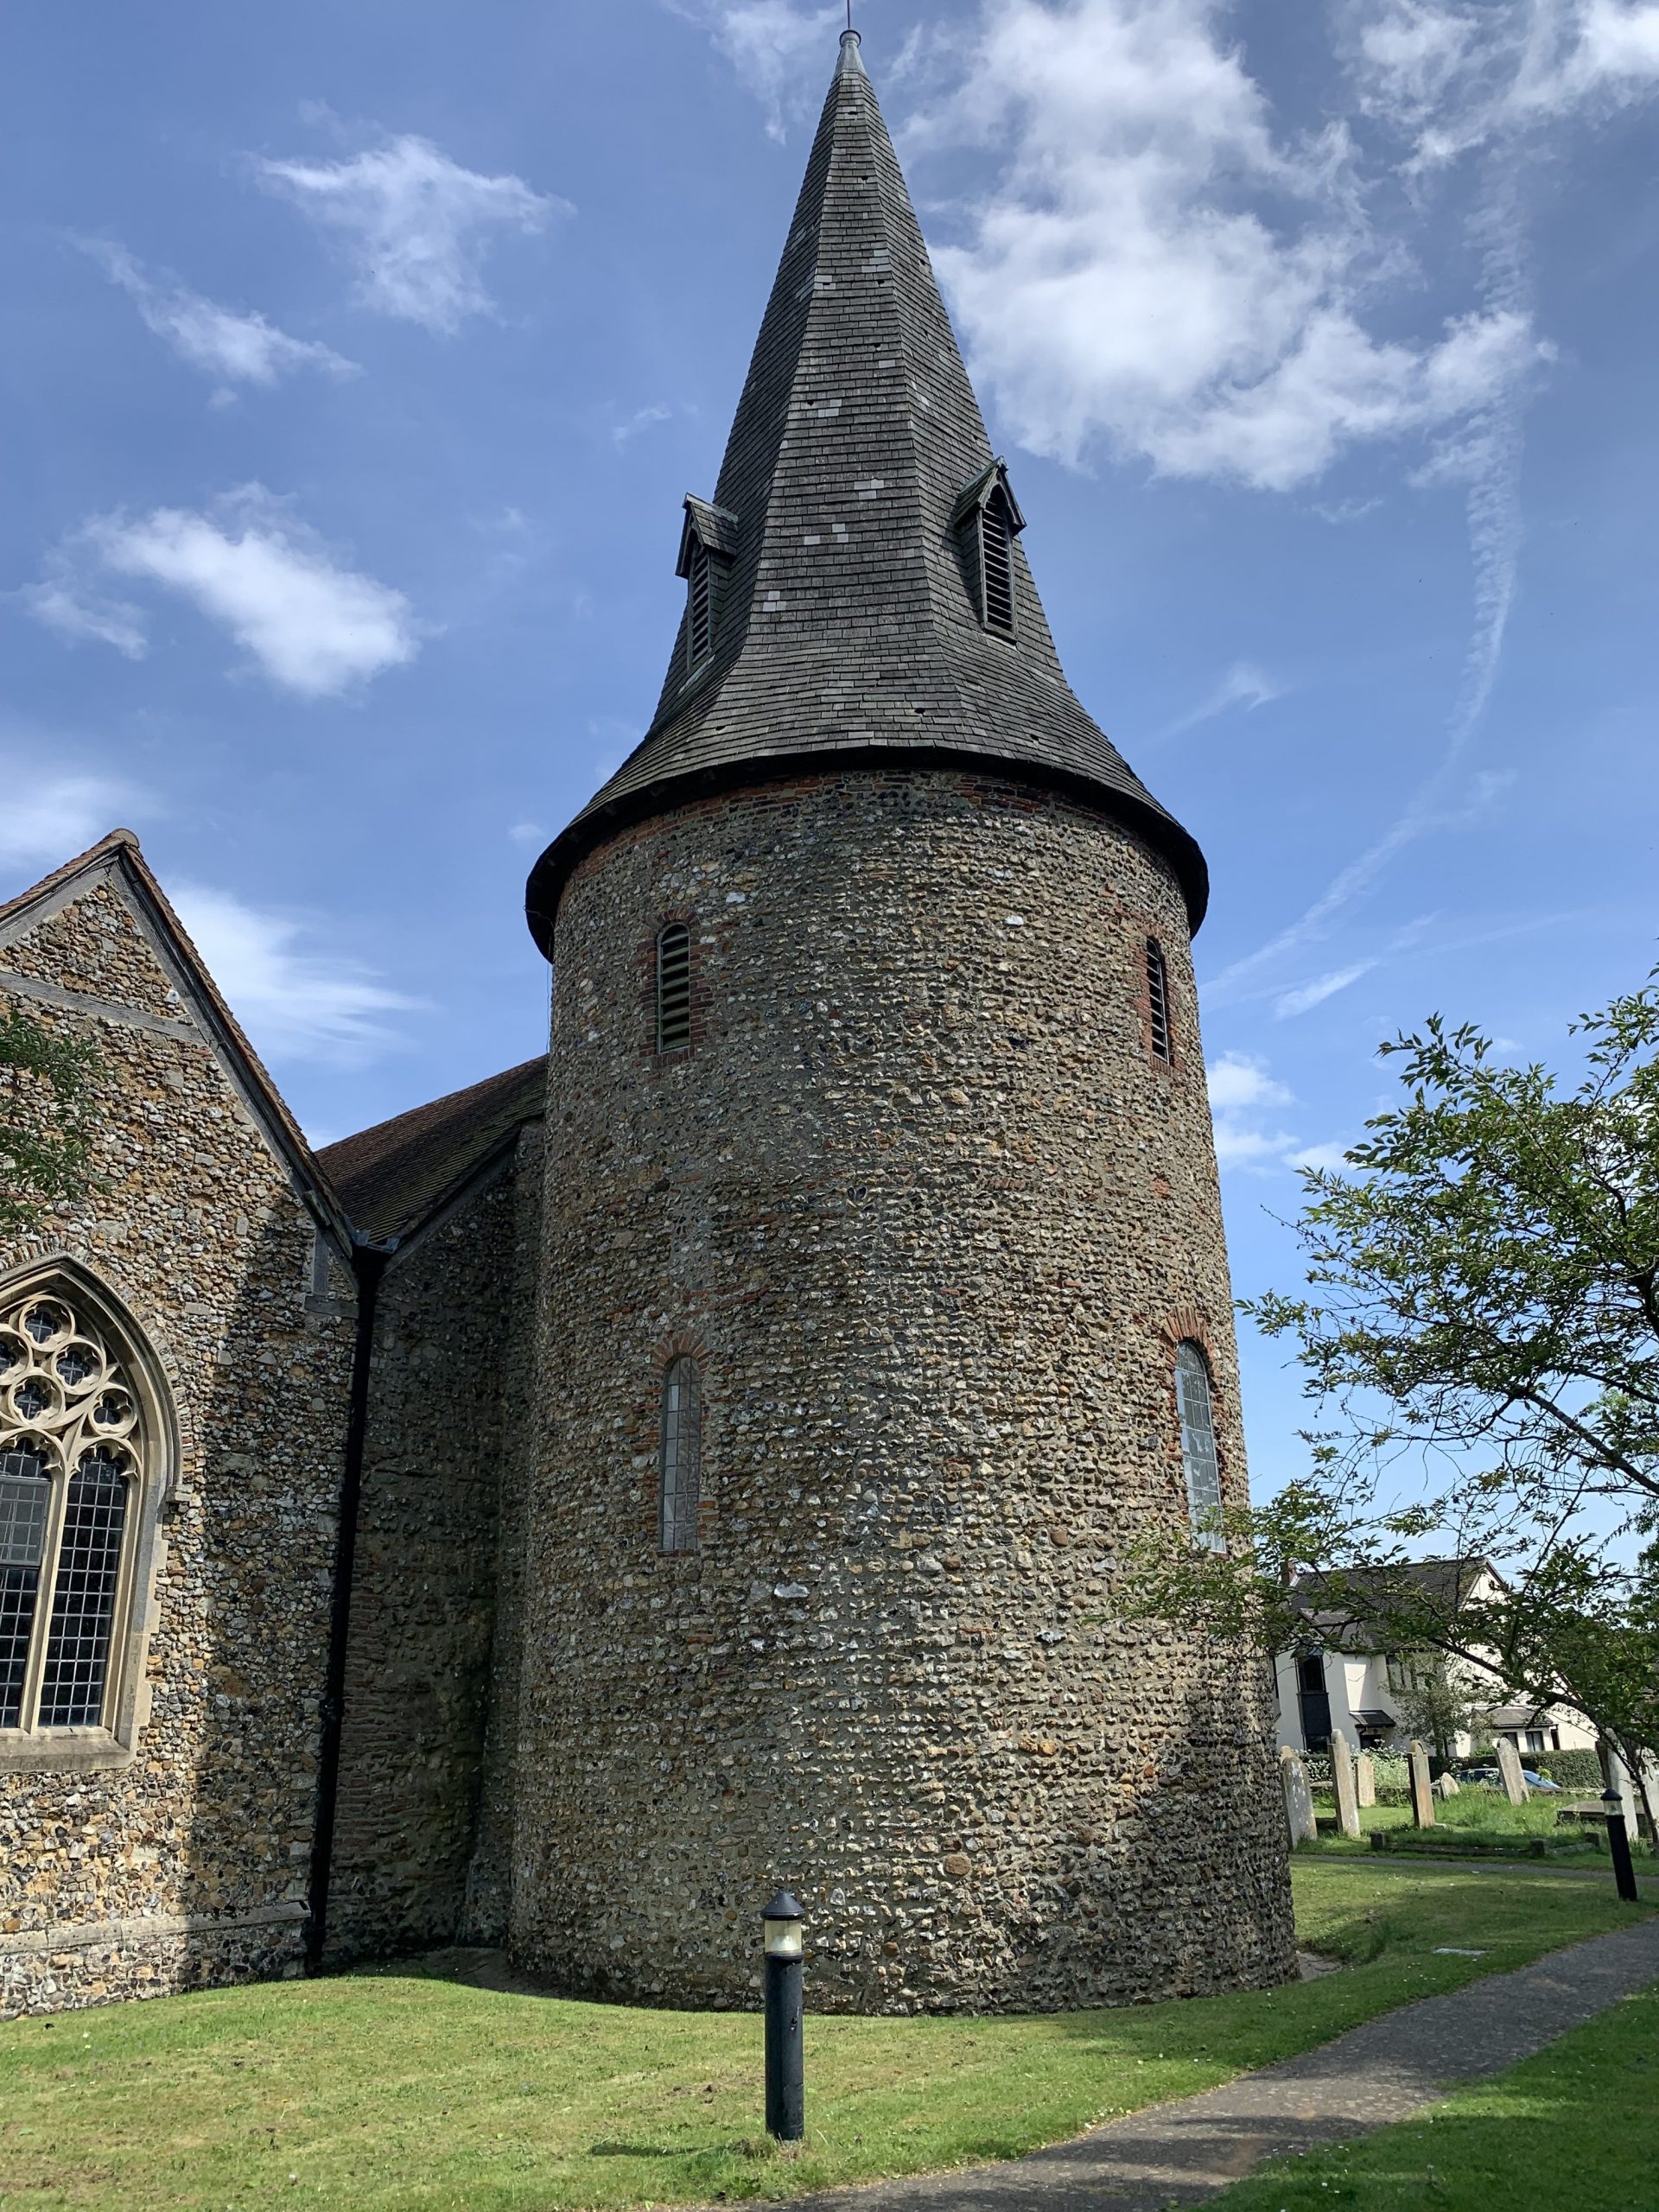 The tower and spire at St Mary with St Leonard Church, Essex prior to its repair